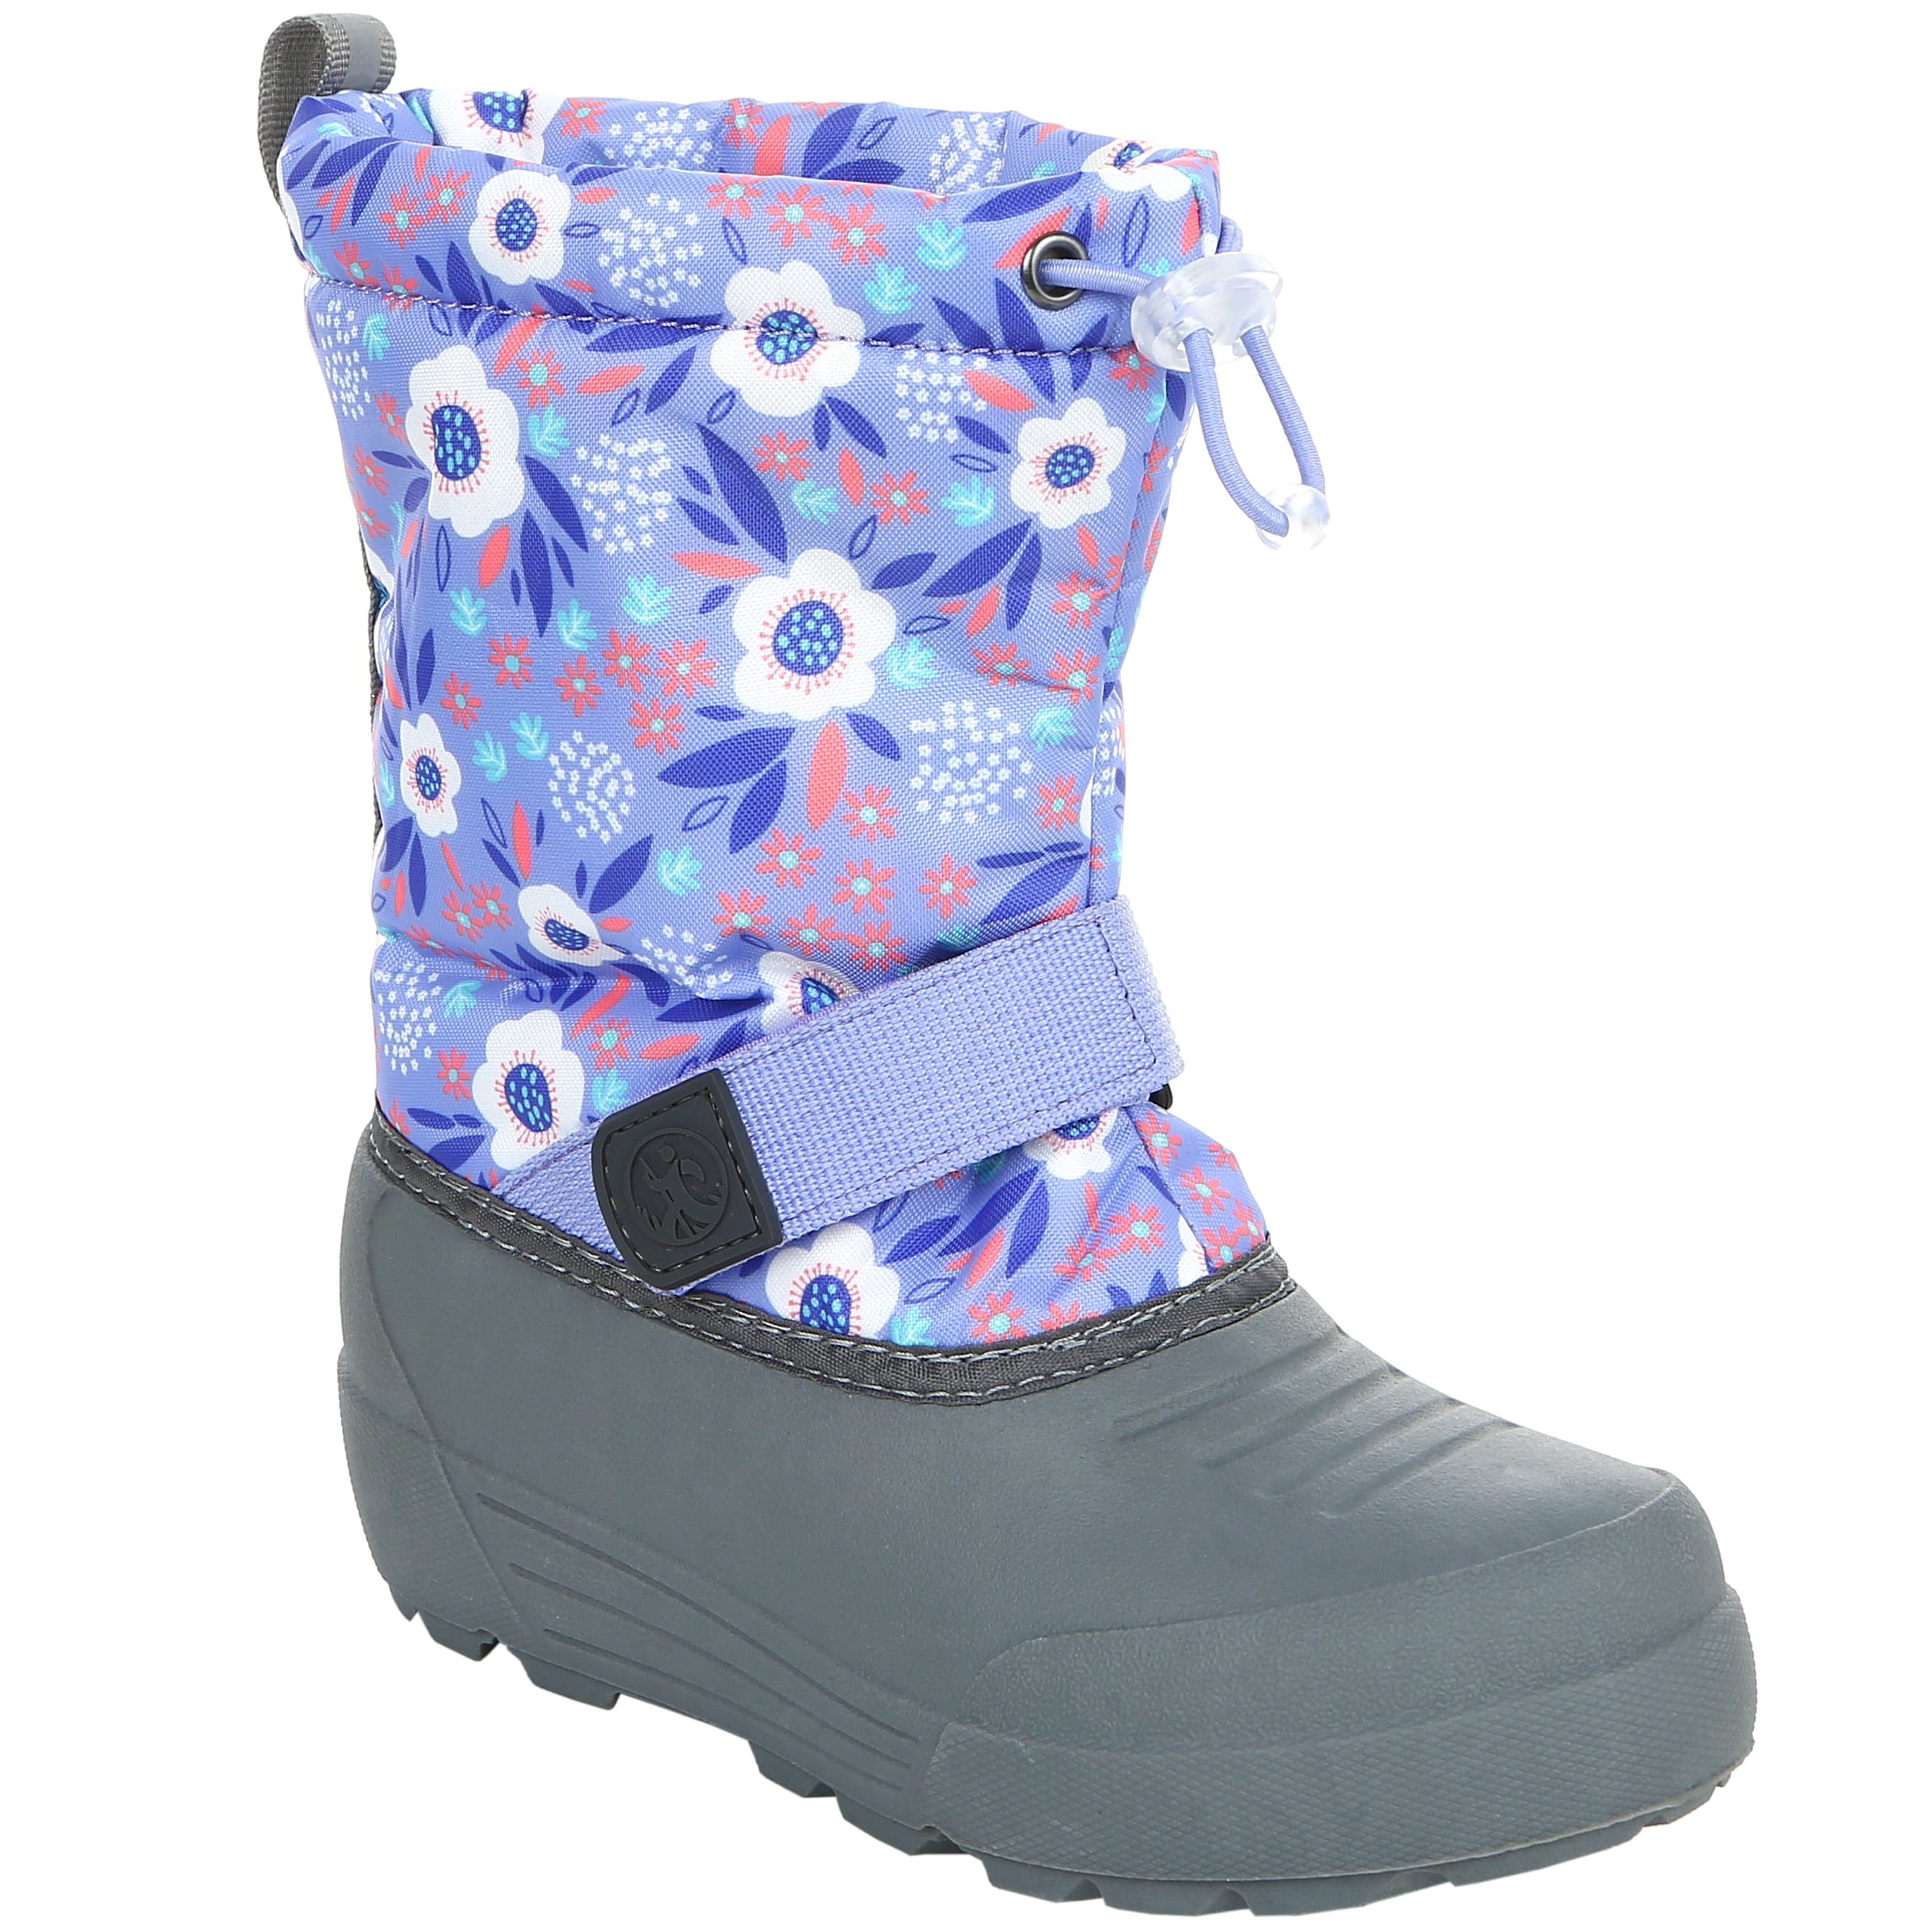 Kids' Girls' Ava Cold Weather Snow Boot